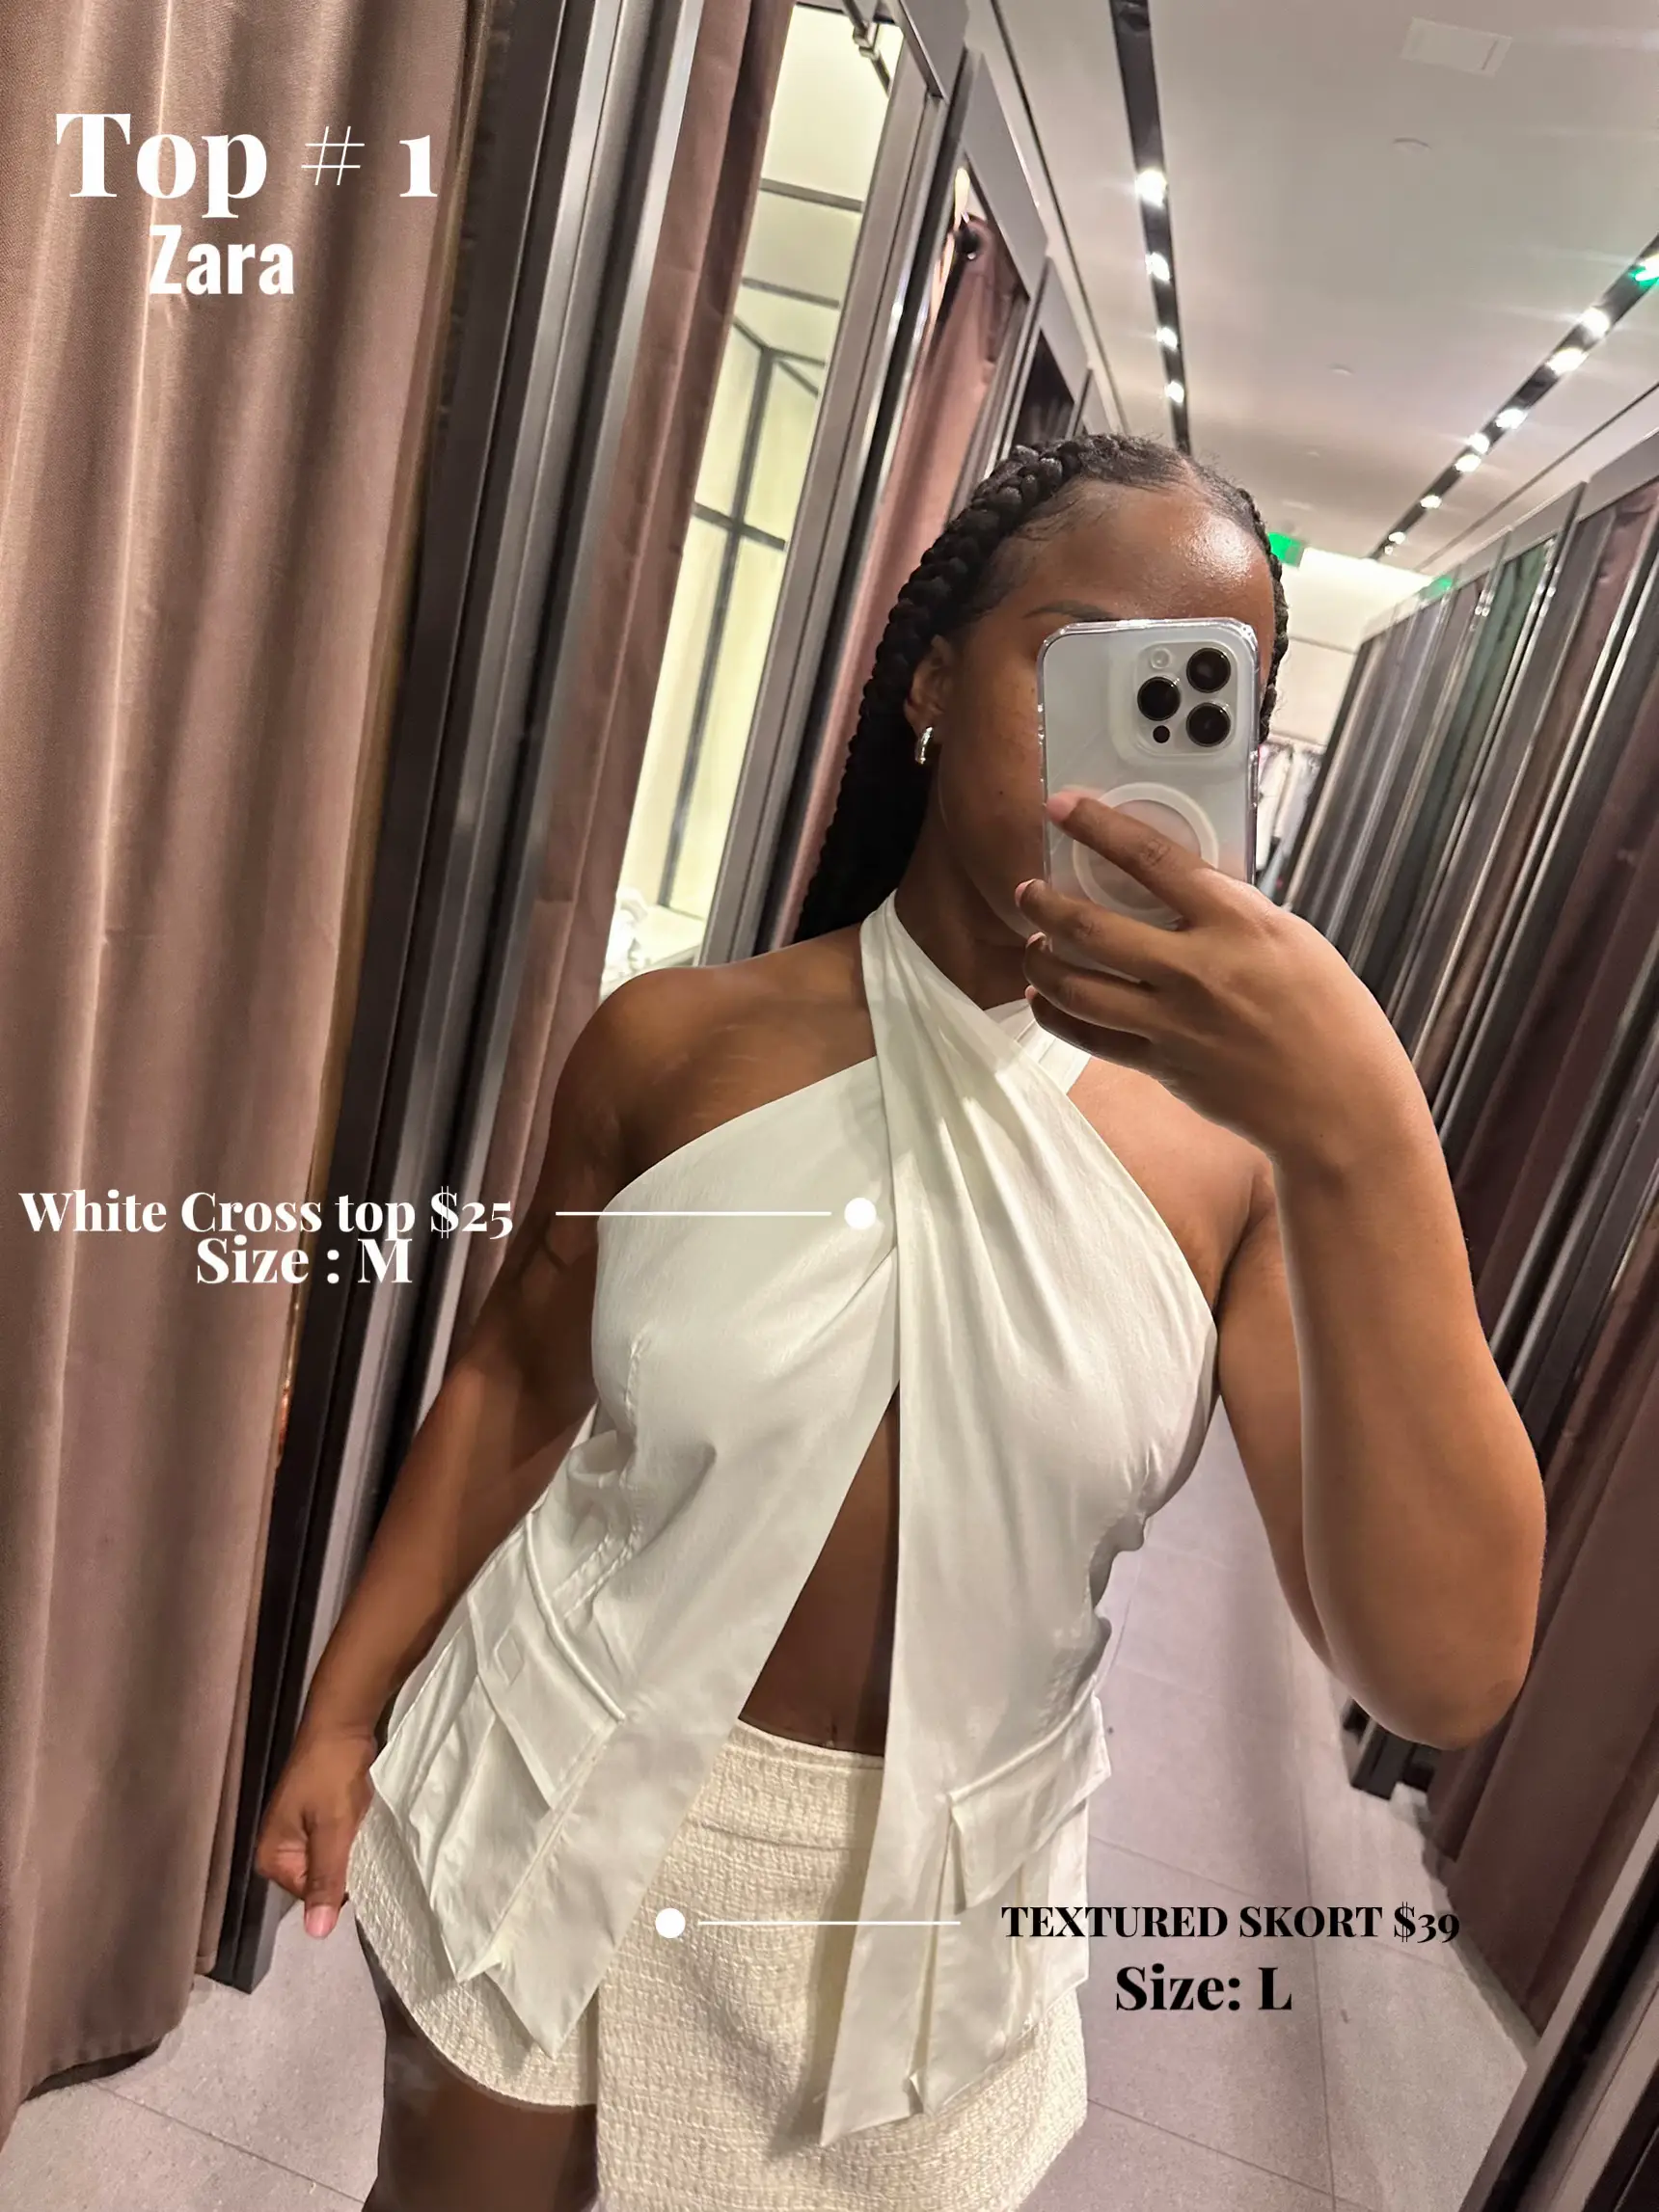 Zara Summer Top Try On Haul, Gallery posted by Iamyeabuk